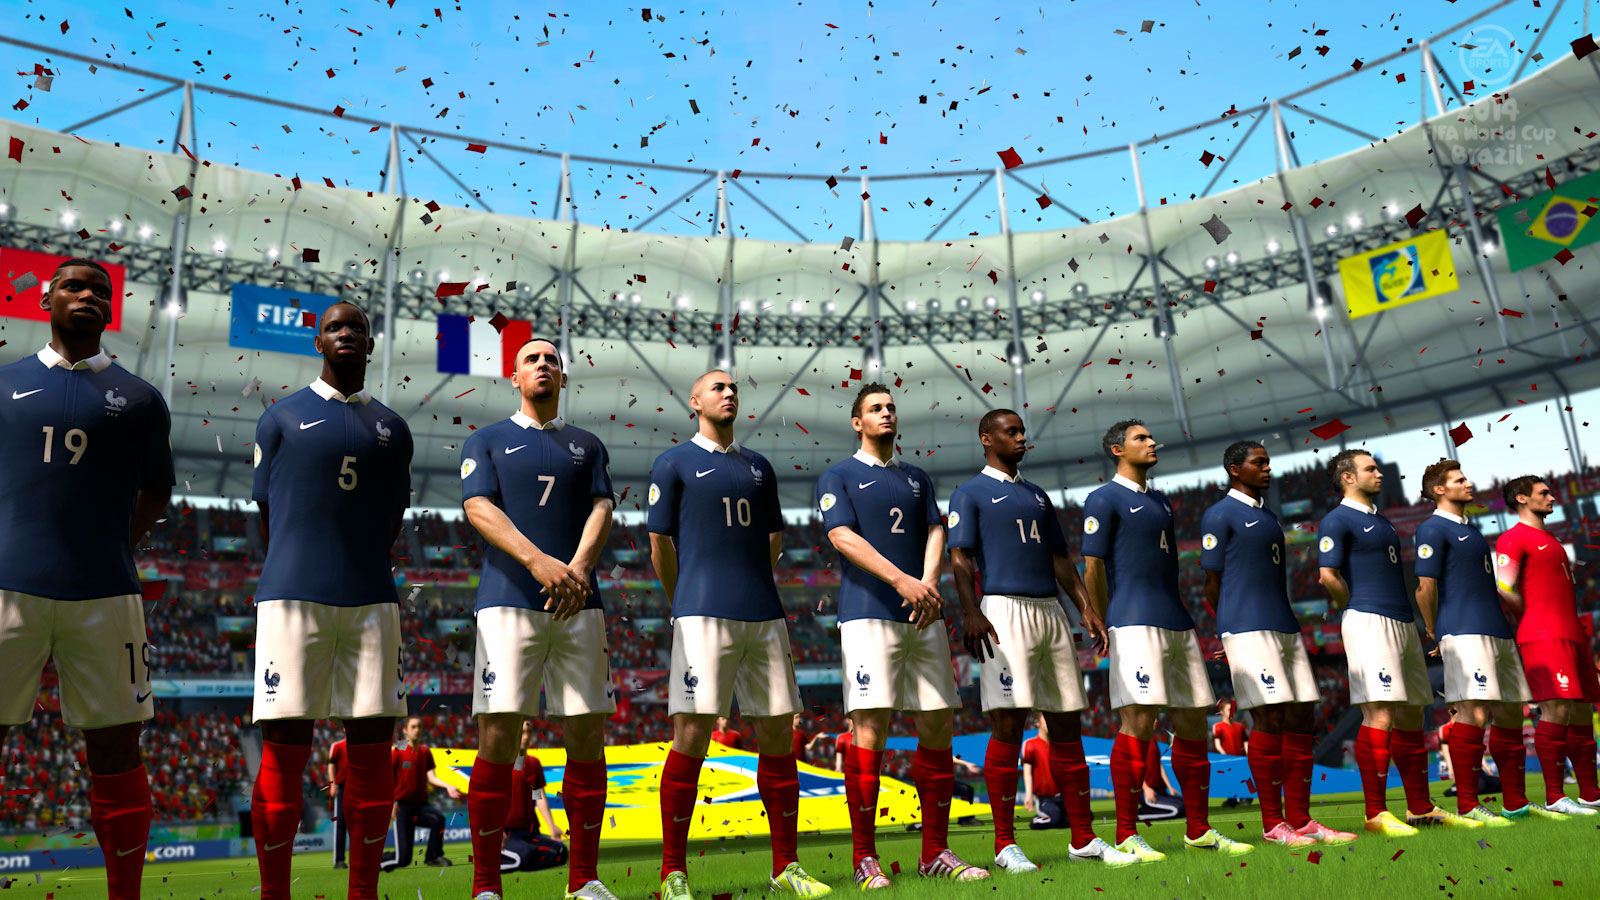 Xbox One, PS4, and PC not getting FIFA World Cup game, devs explain why  [UPDATE] - GameSpot